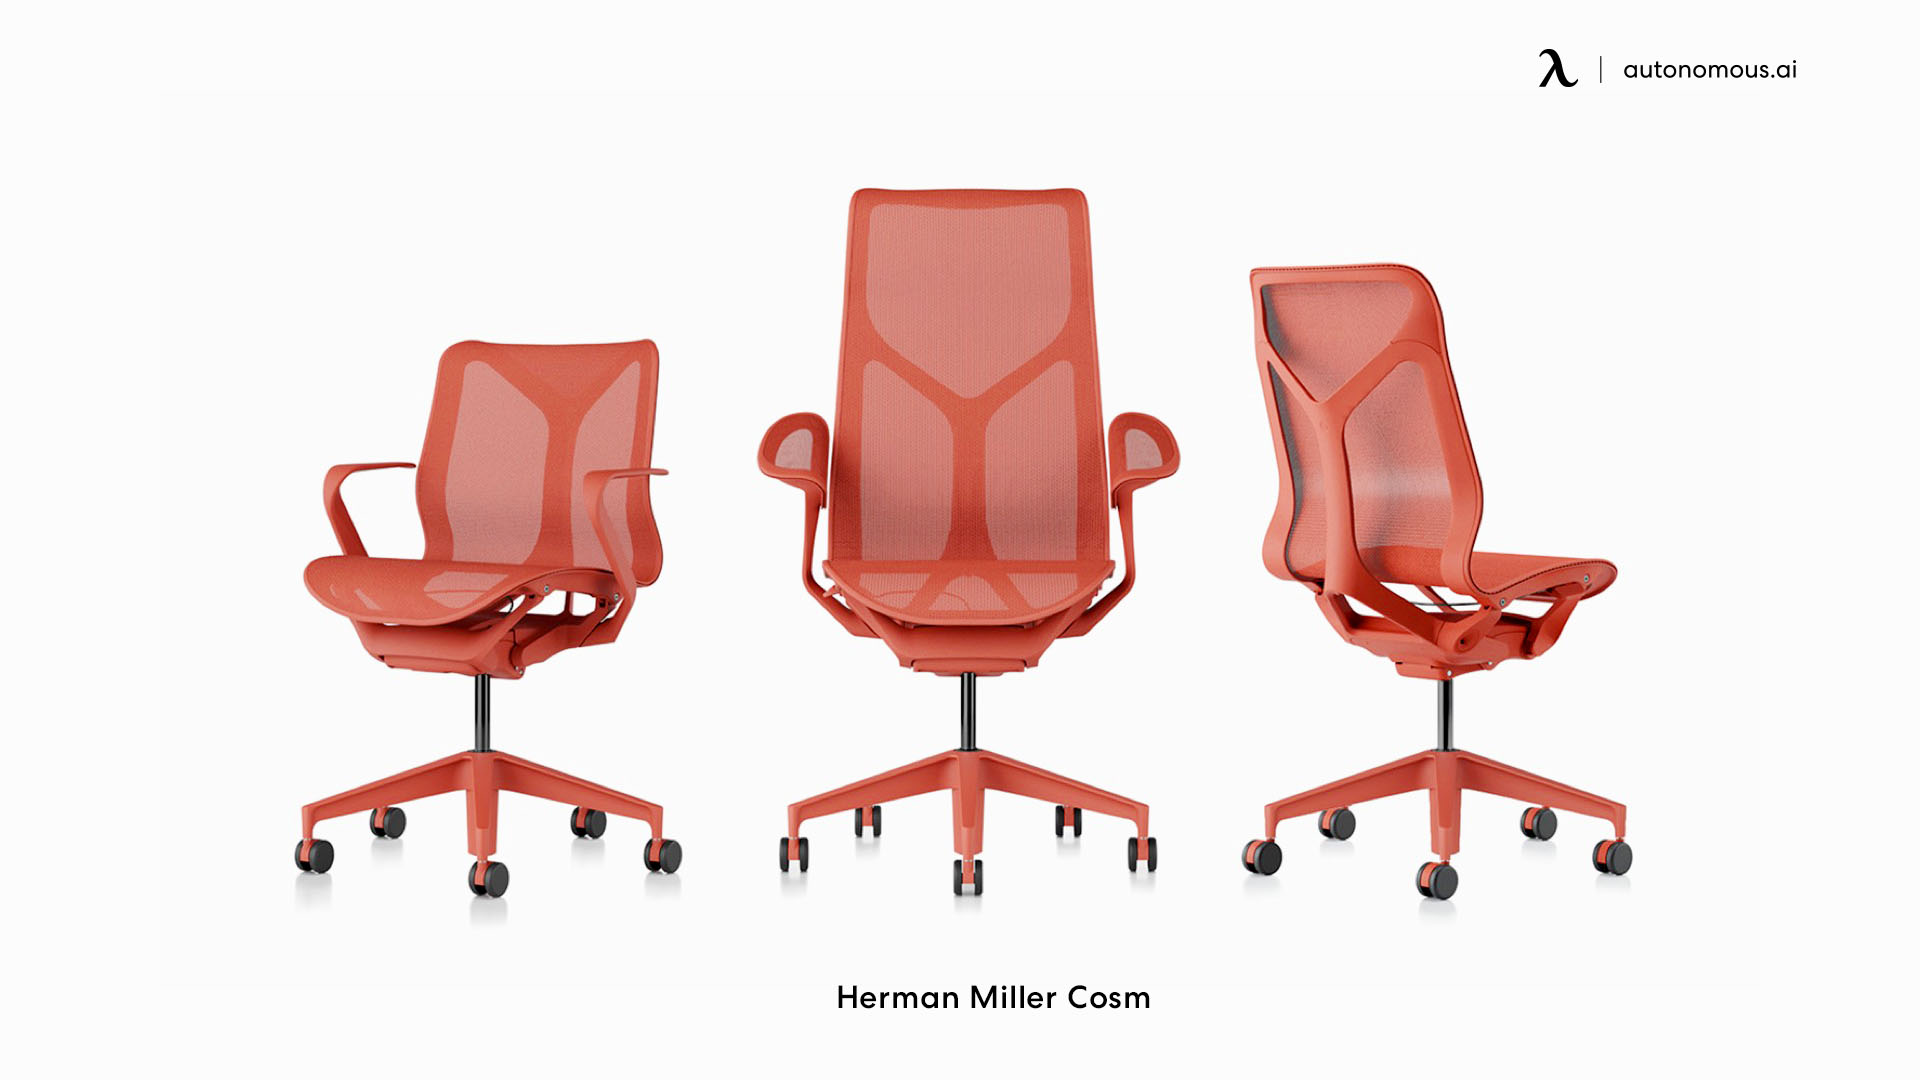 Herman Miller Cosm stylish office chair